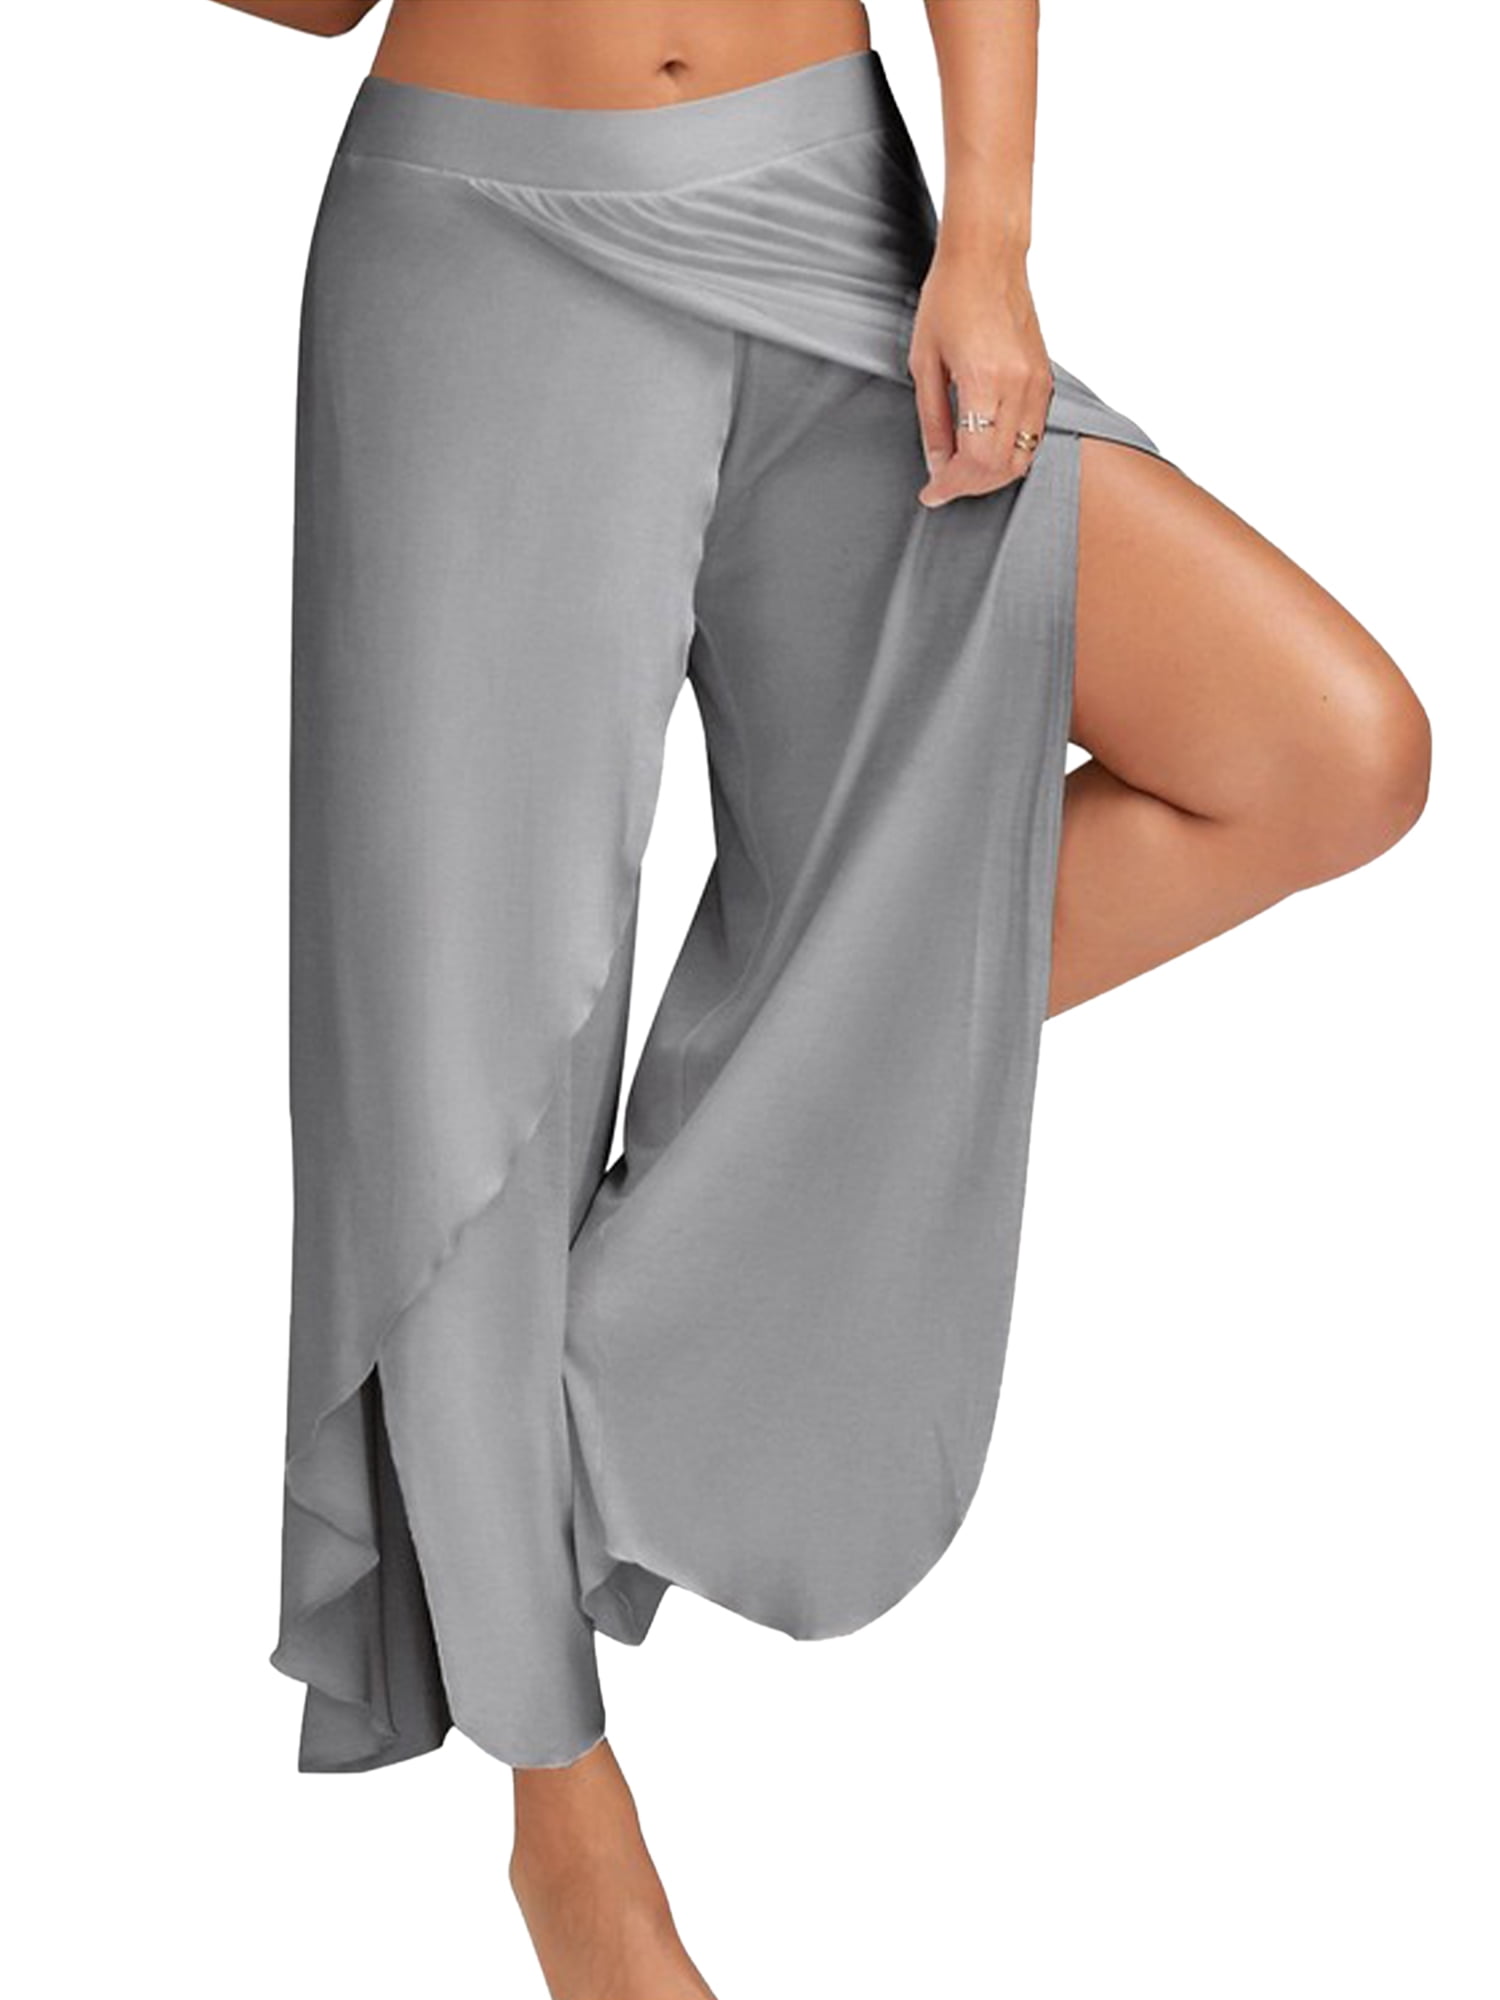 Frontwalk Women Palazzo Pant High Waist Yoga Pants Wide Leg Trousers Sport  Casual Bottoms Solid Color Light Gray XXL 